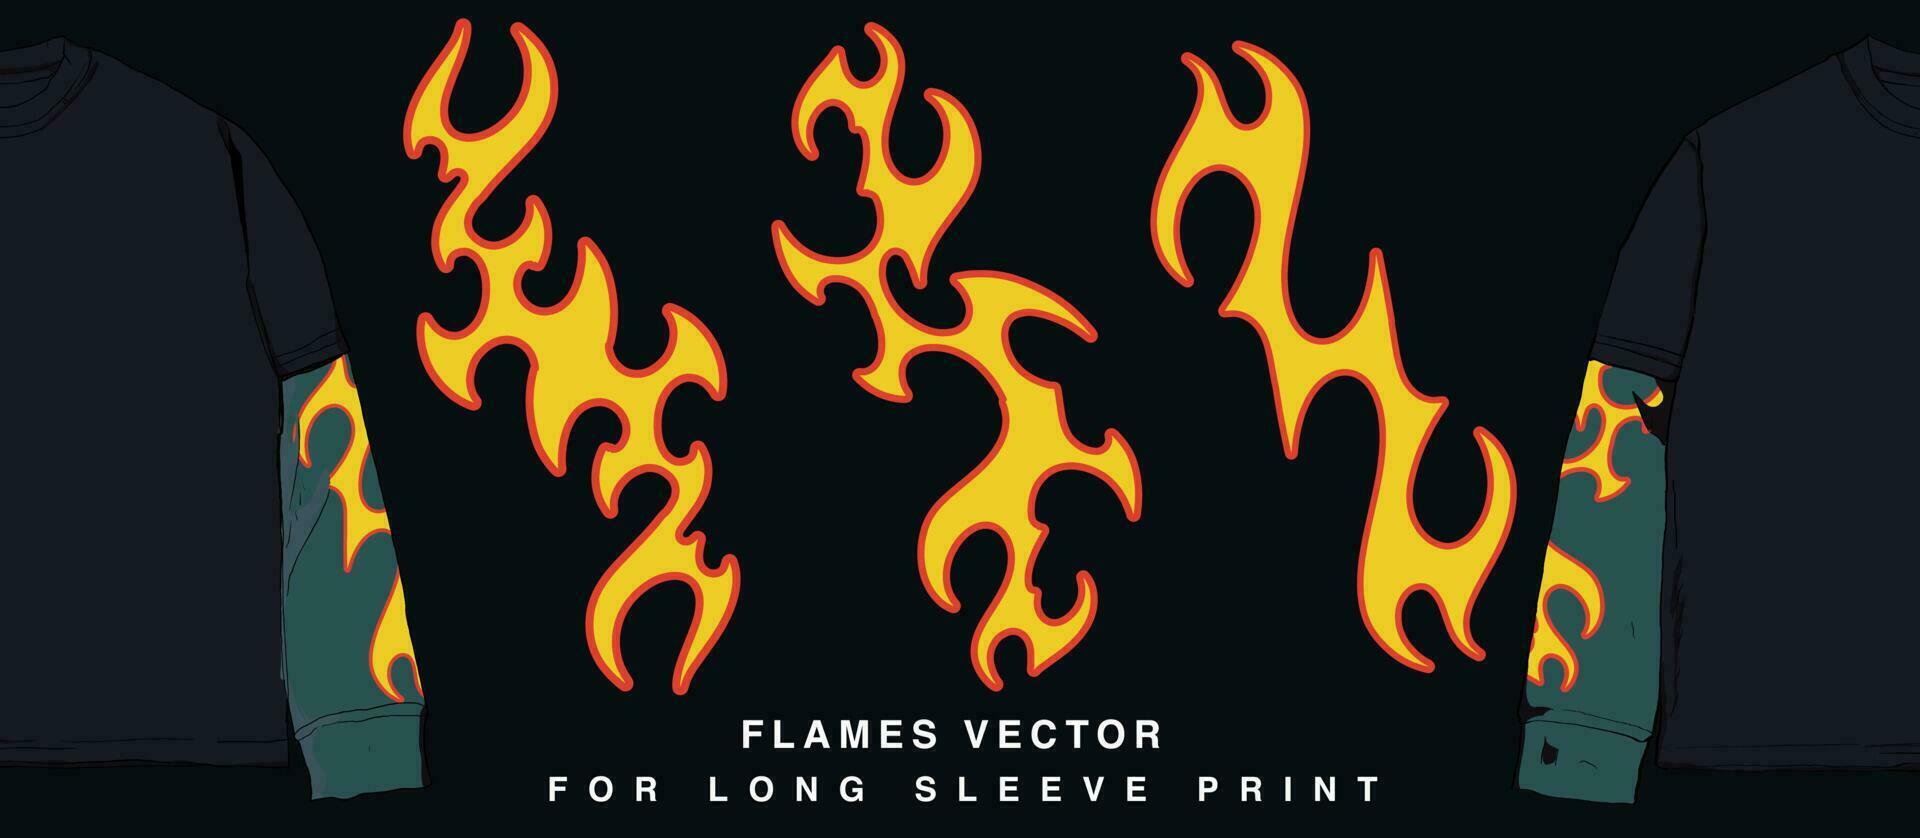 Inferno Style and Blaze a Trail with Hot Fire Ornaments for Sleeve and Chest Prints on 90's-Inspired Band T-Shirts and Merchandise vector